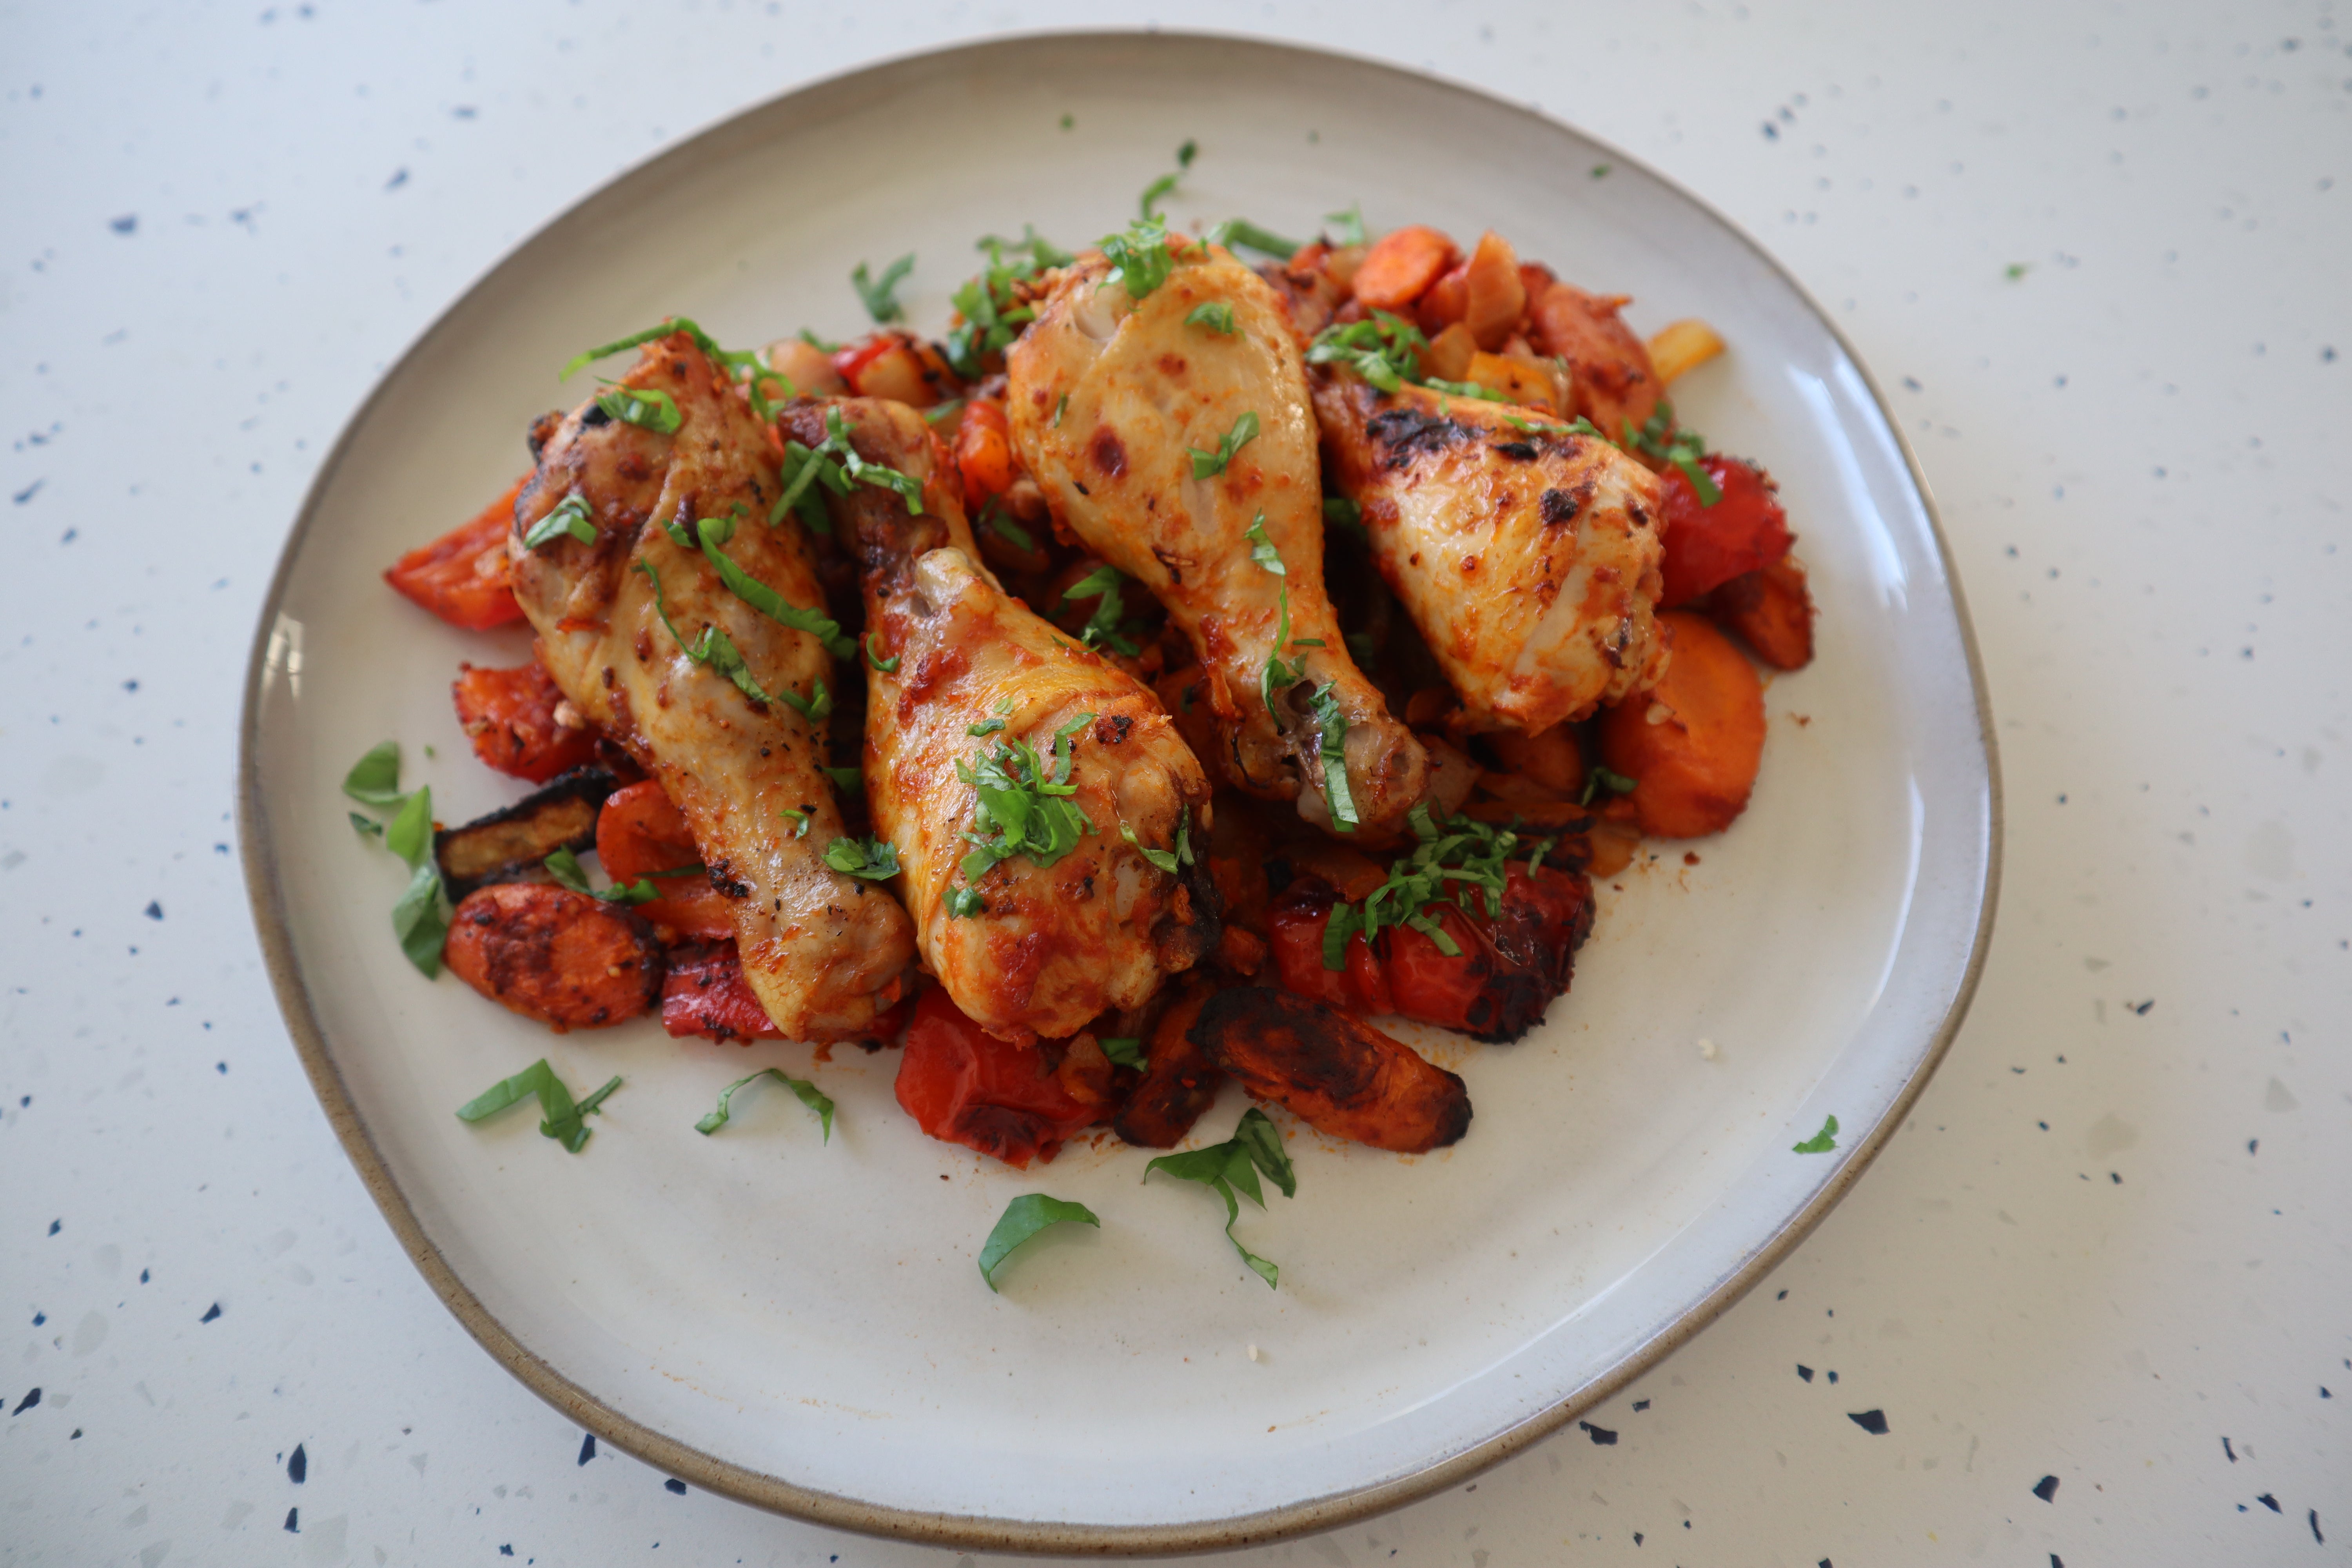 Harissa roasted chicken (drumsticks) on top of roasted carrots and peppers